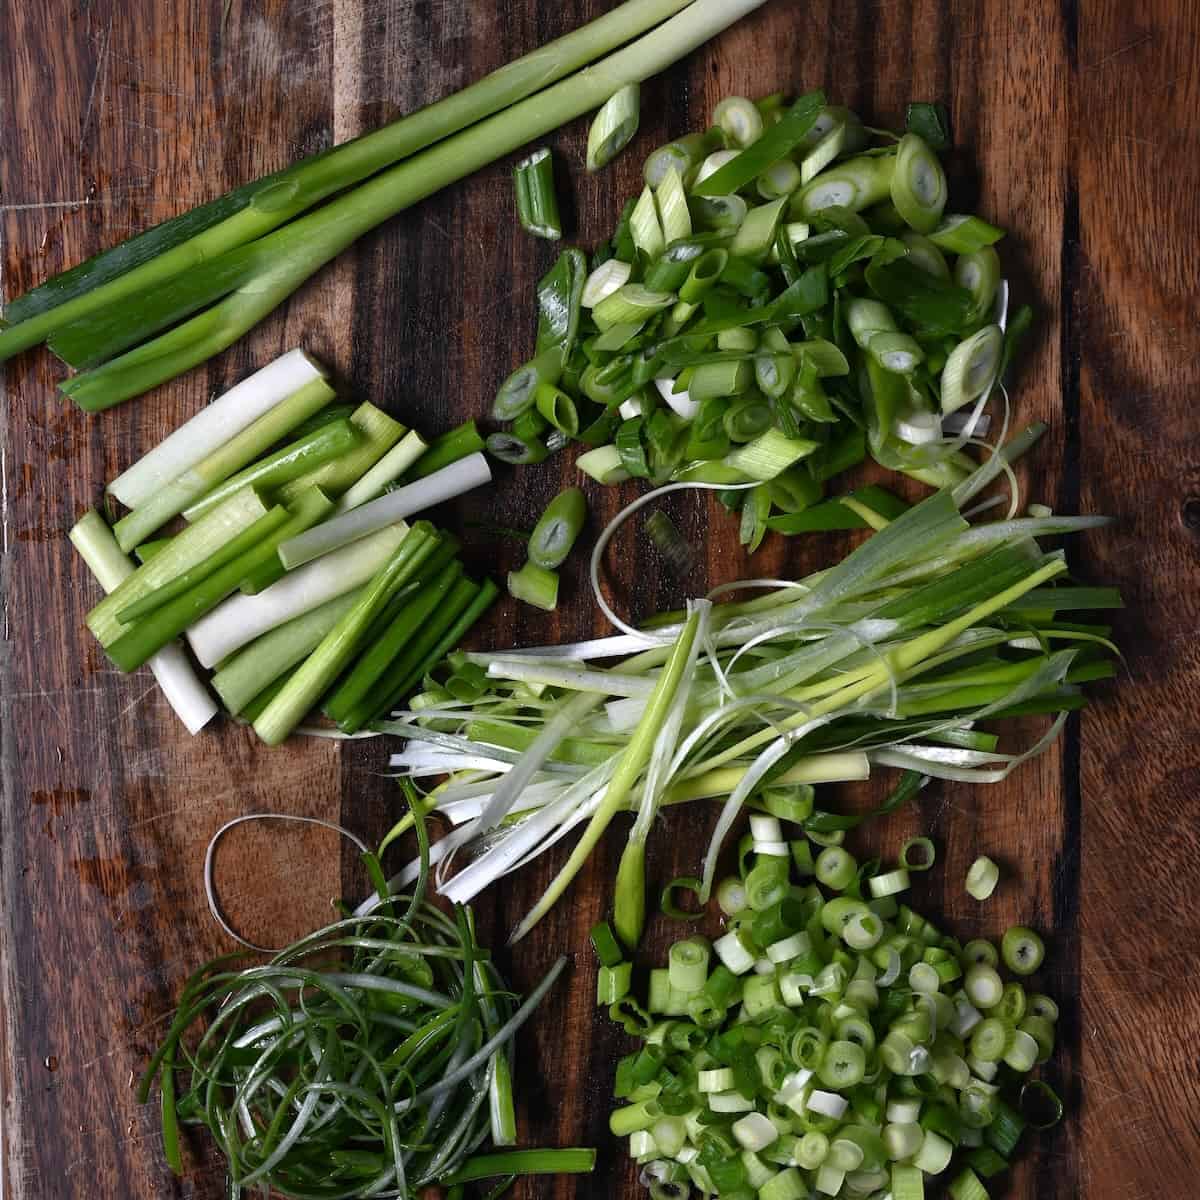 https://www.alphafoodie.com/wp-content/uploads/2023/02/How-to-cut-green-onions-square.jpeg